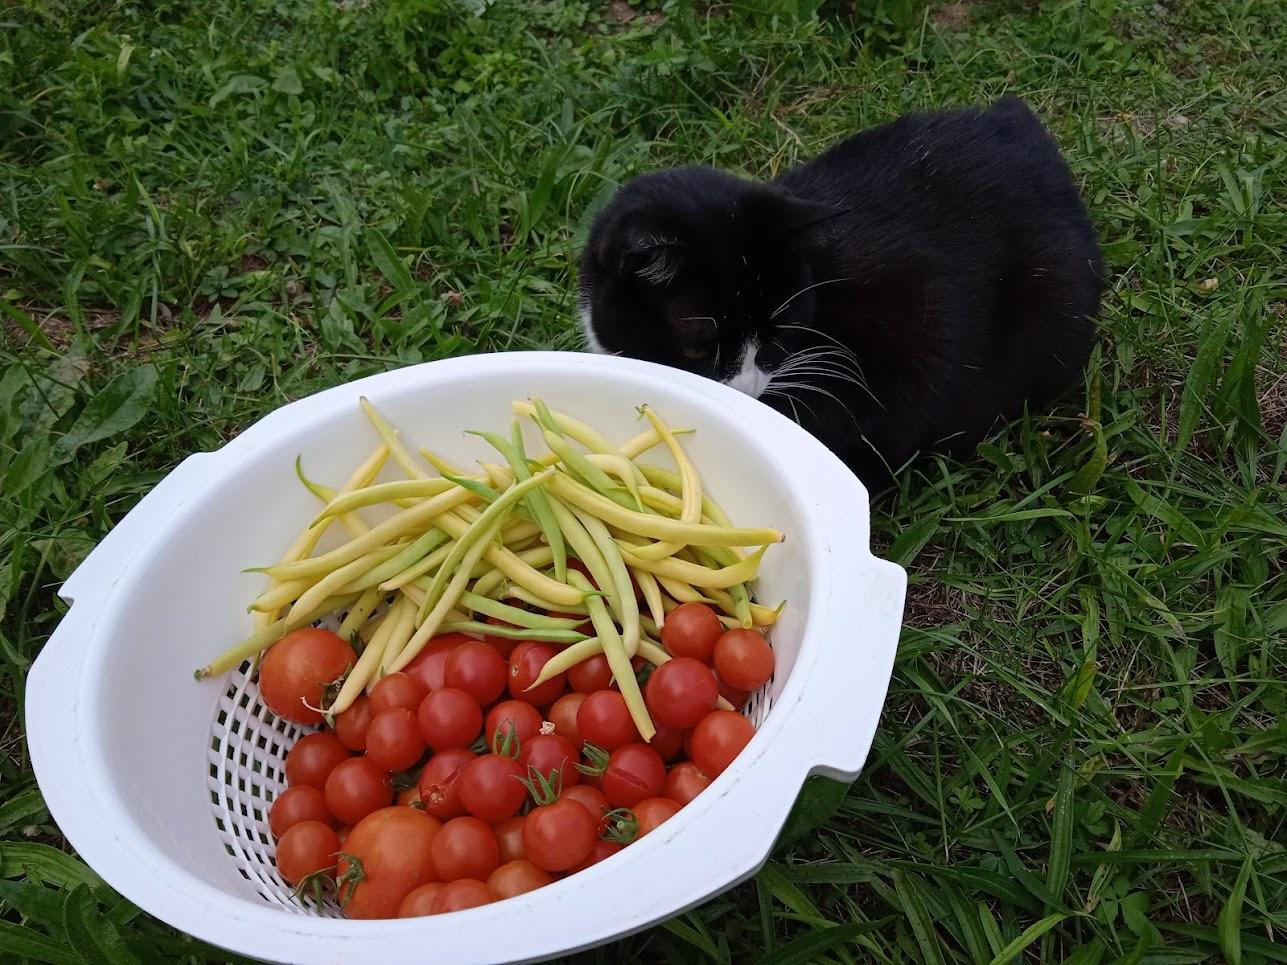 Yuki harvested some greens from the garden !